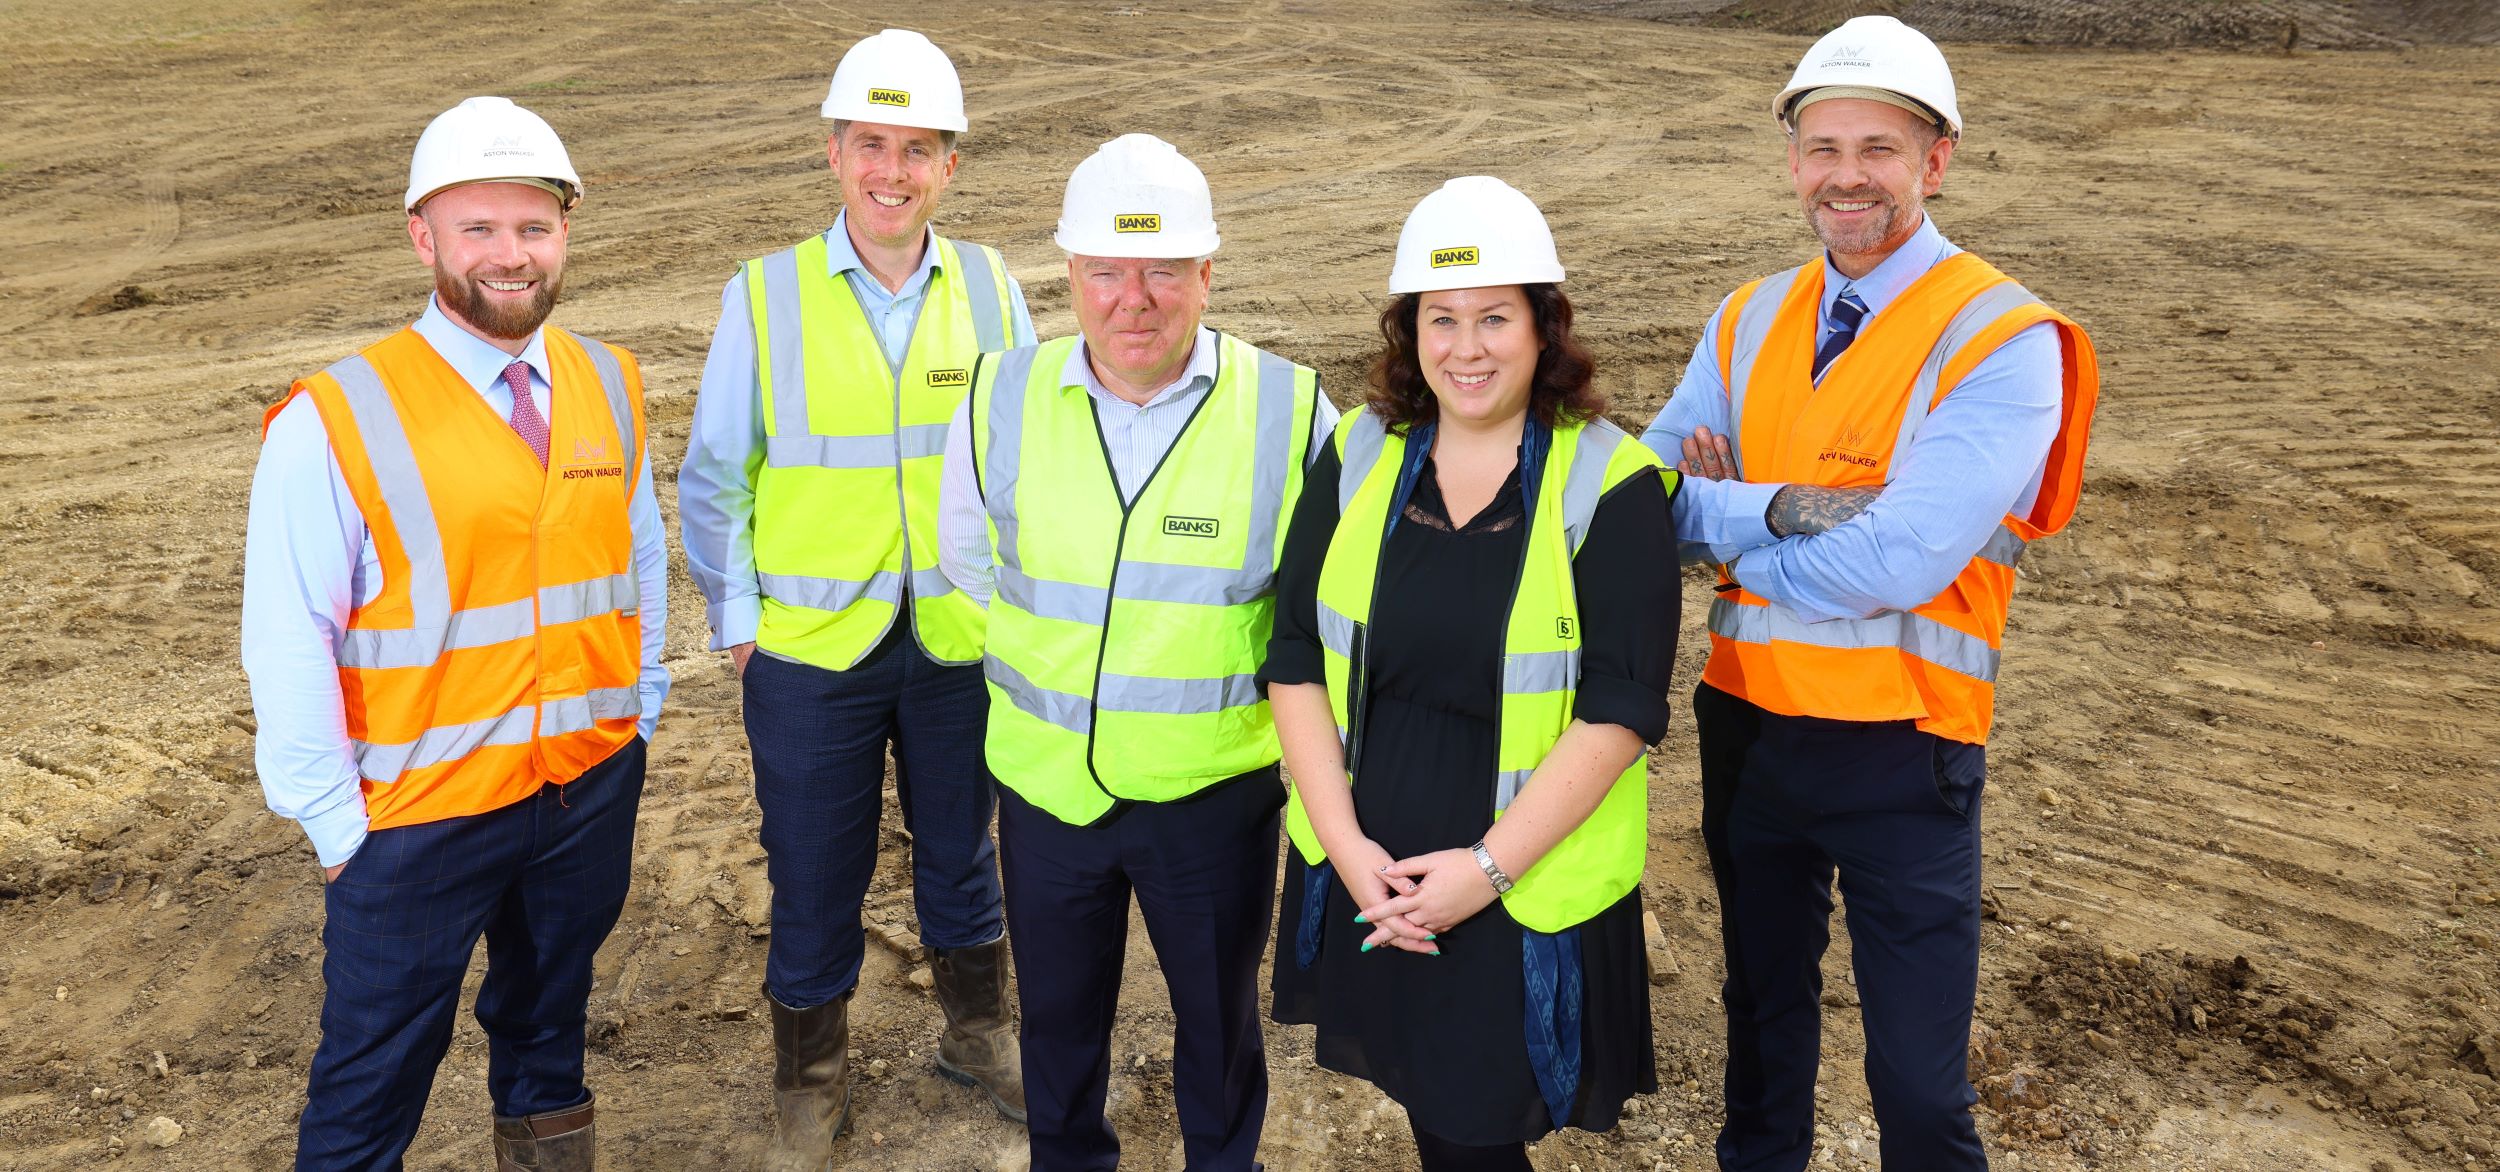 (far left) Nathan Walker and (far right) Davie Aston of Aston Walker Developments, with (from centre left) Banks Homes managing director Russ Hall, Banks Group commercial manager Brian Hunter and Banks Group executive assistant Lucy Hinds